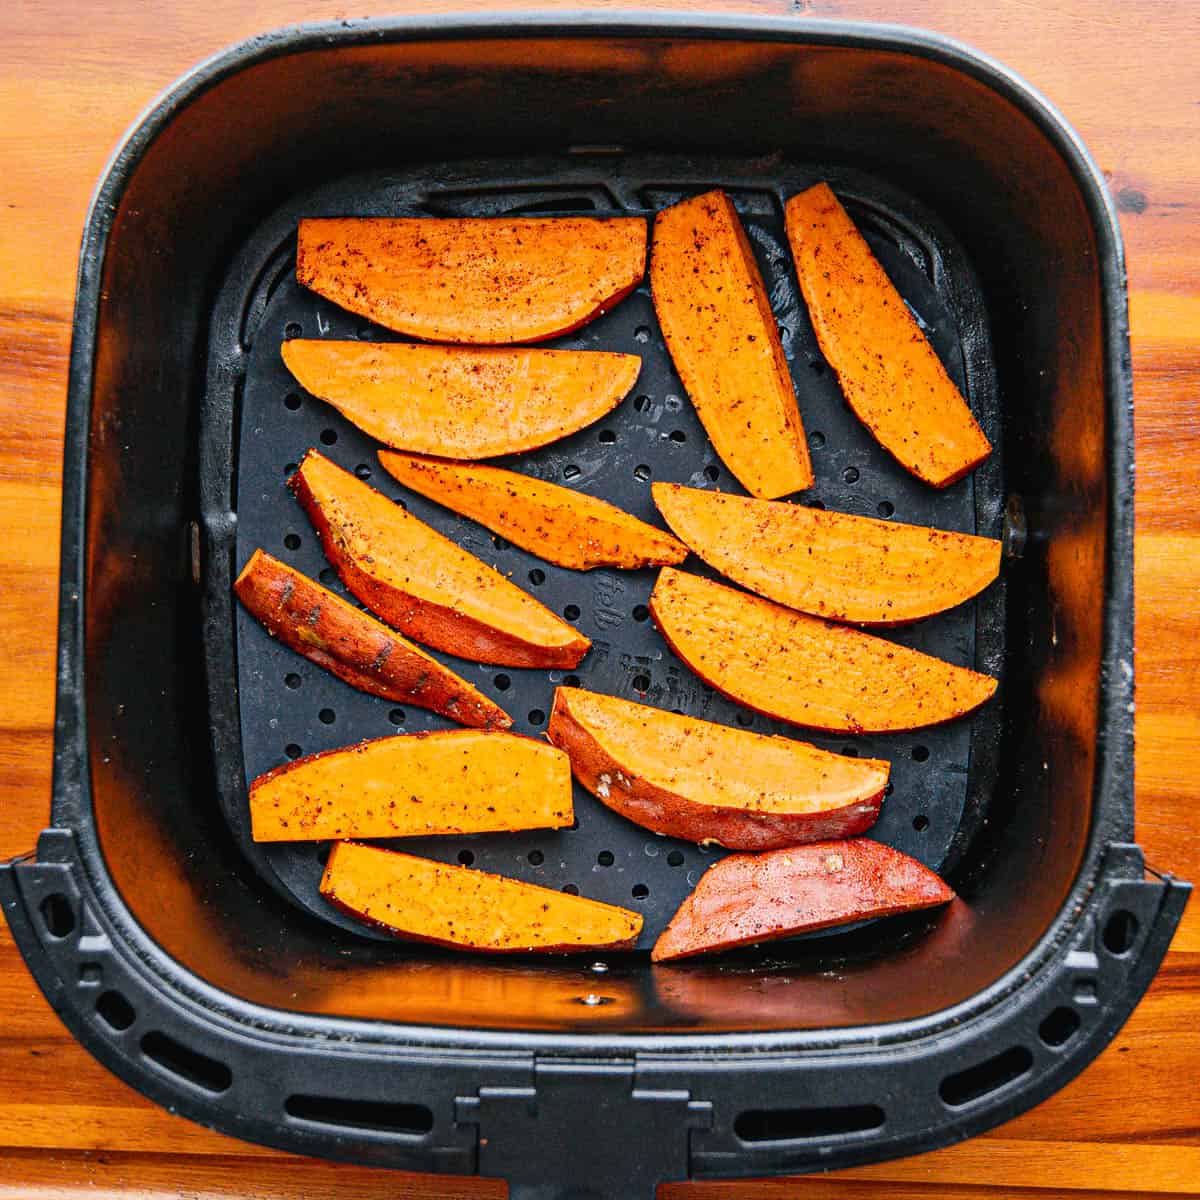 Place the potato wedges in the air fryer basket in a single layer.